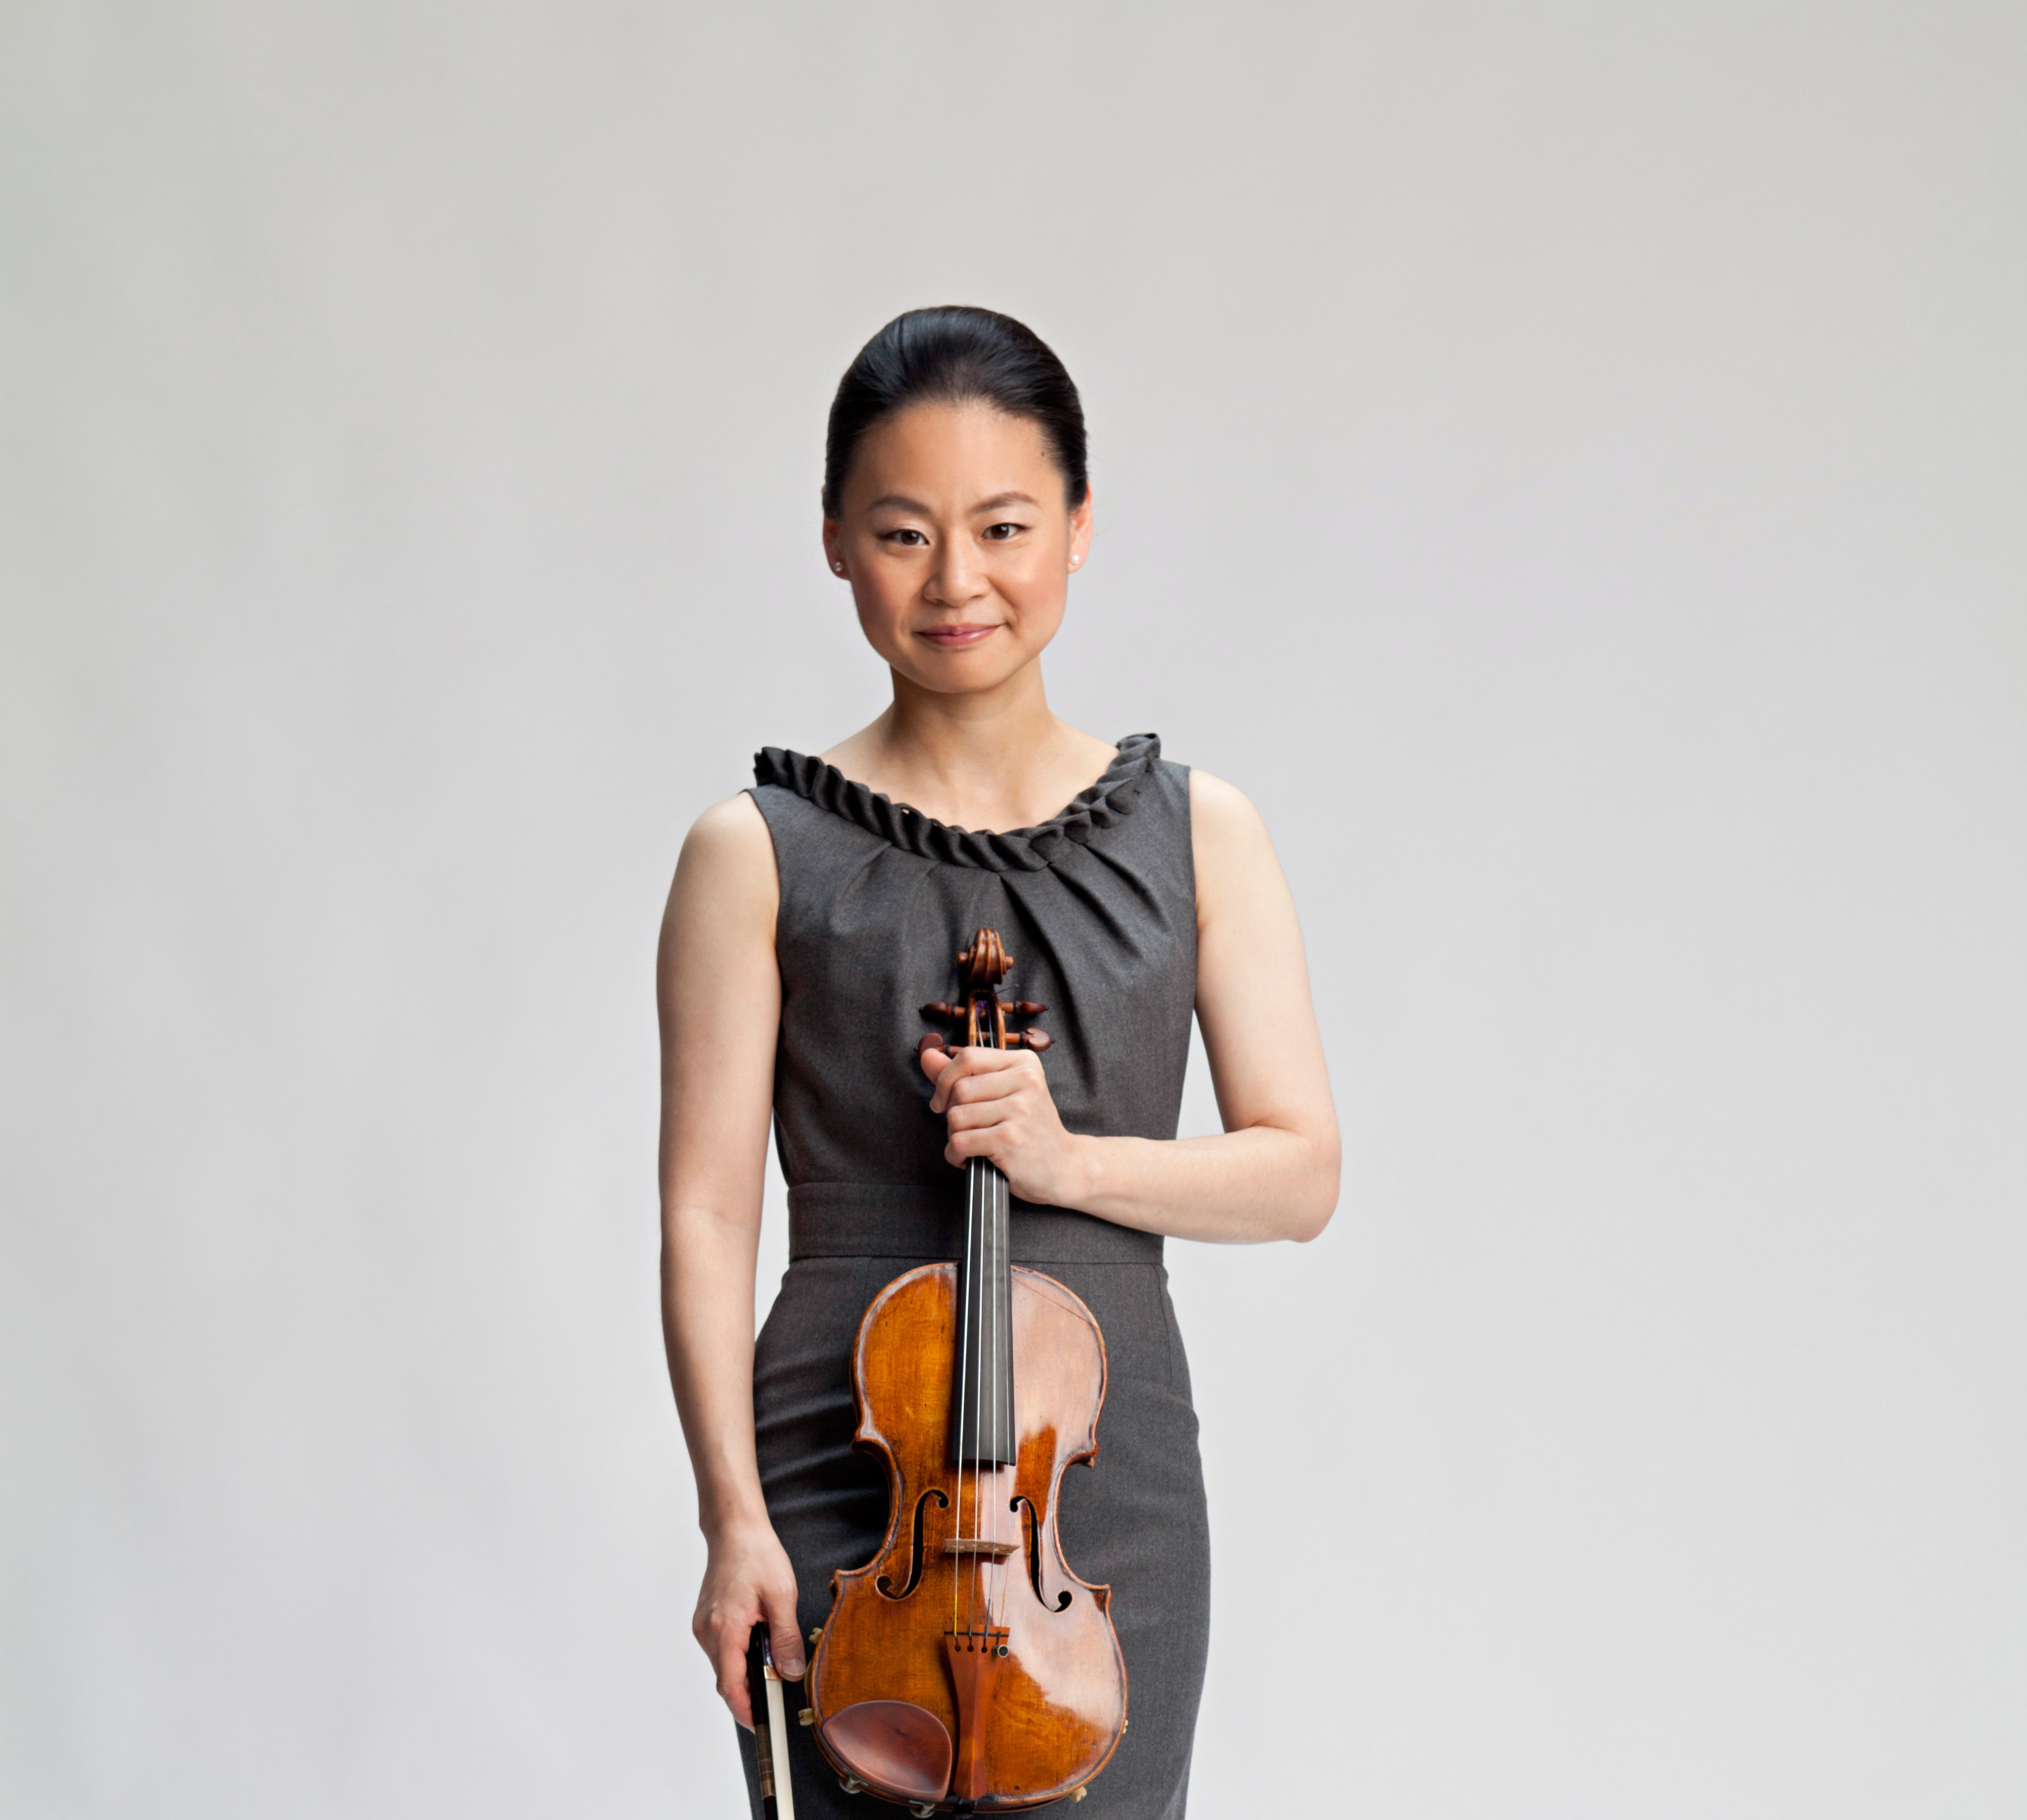 World-famous violin player coming to Palladium • Current Publishing